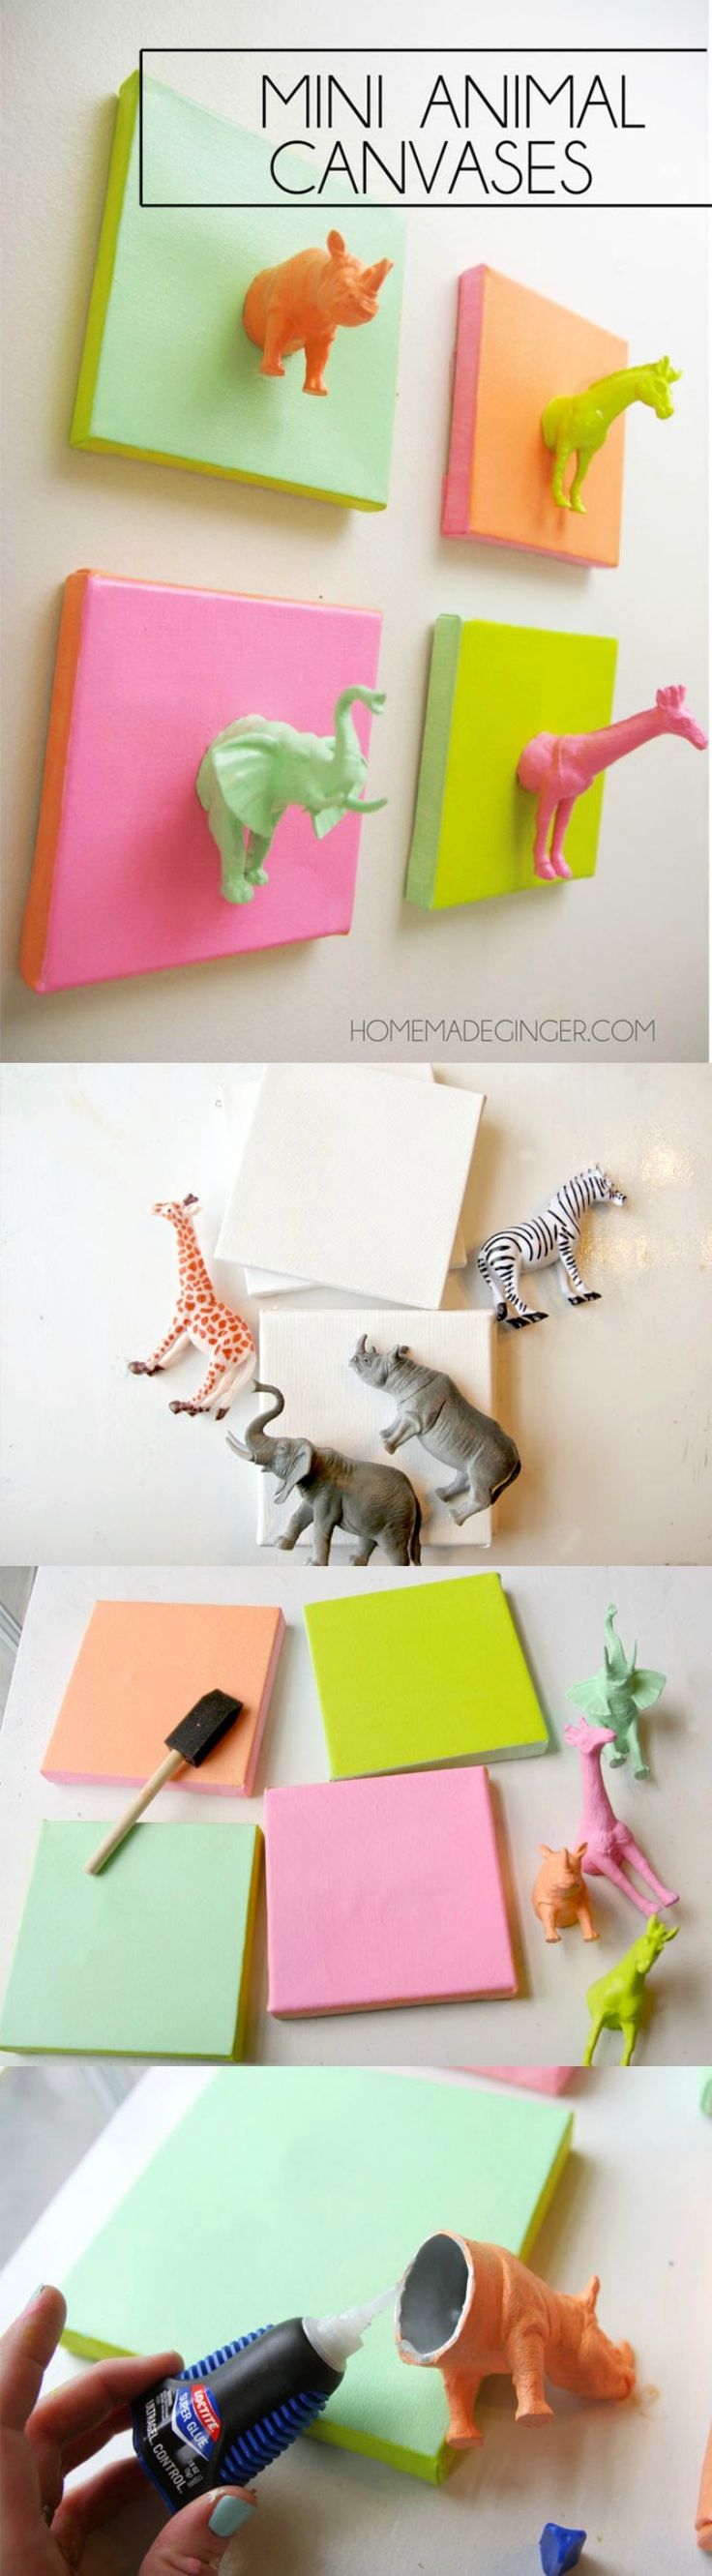 This cute DIY canvas project made with plastic animals is such a fun and easy id...